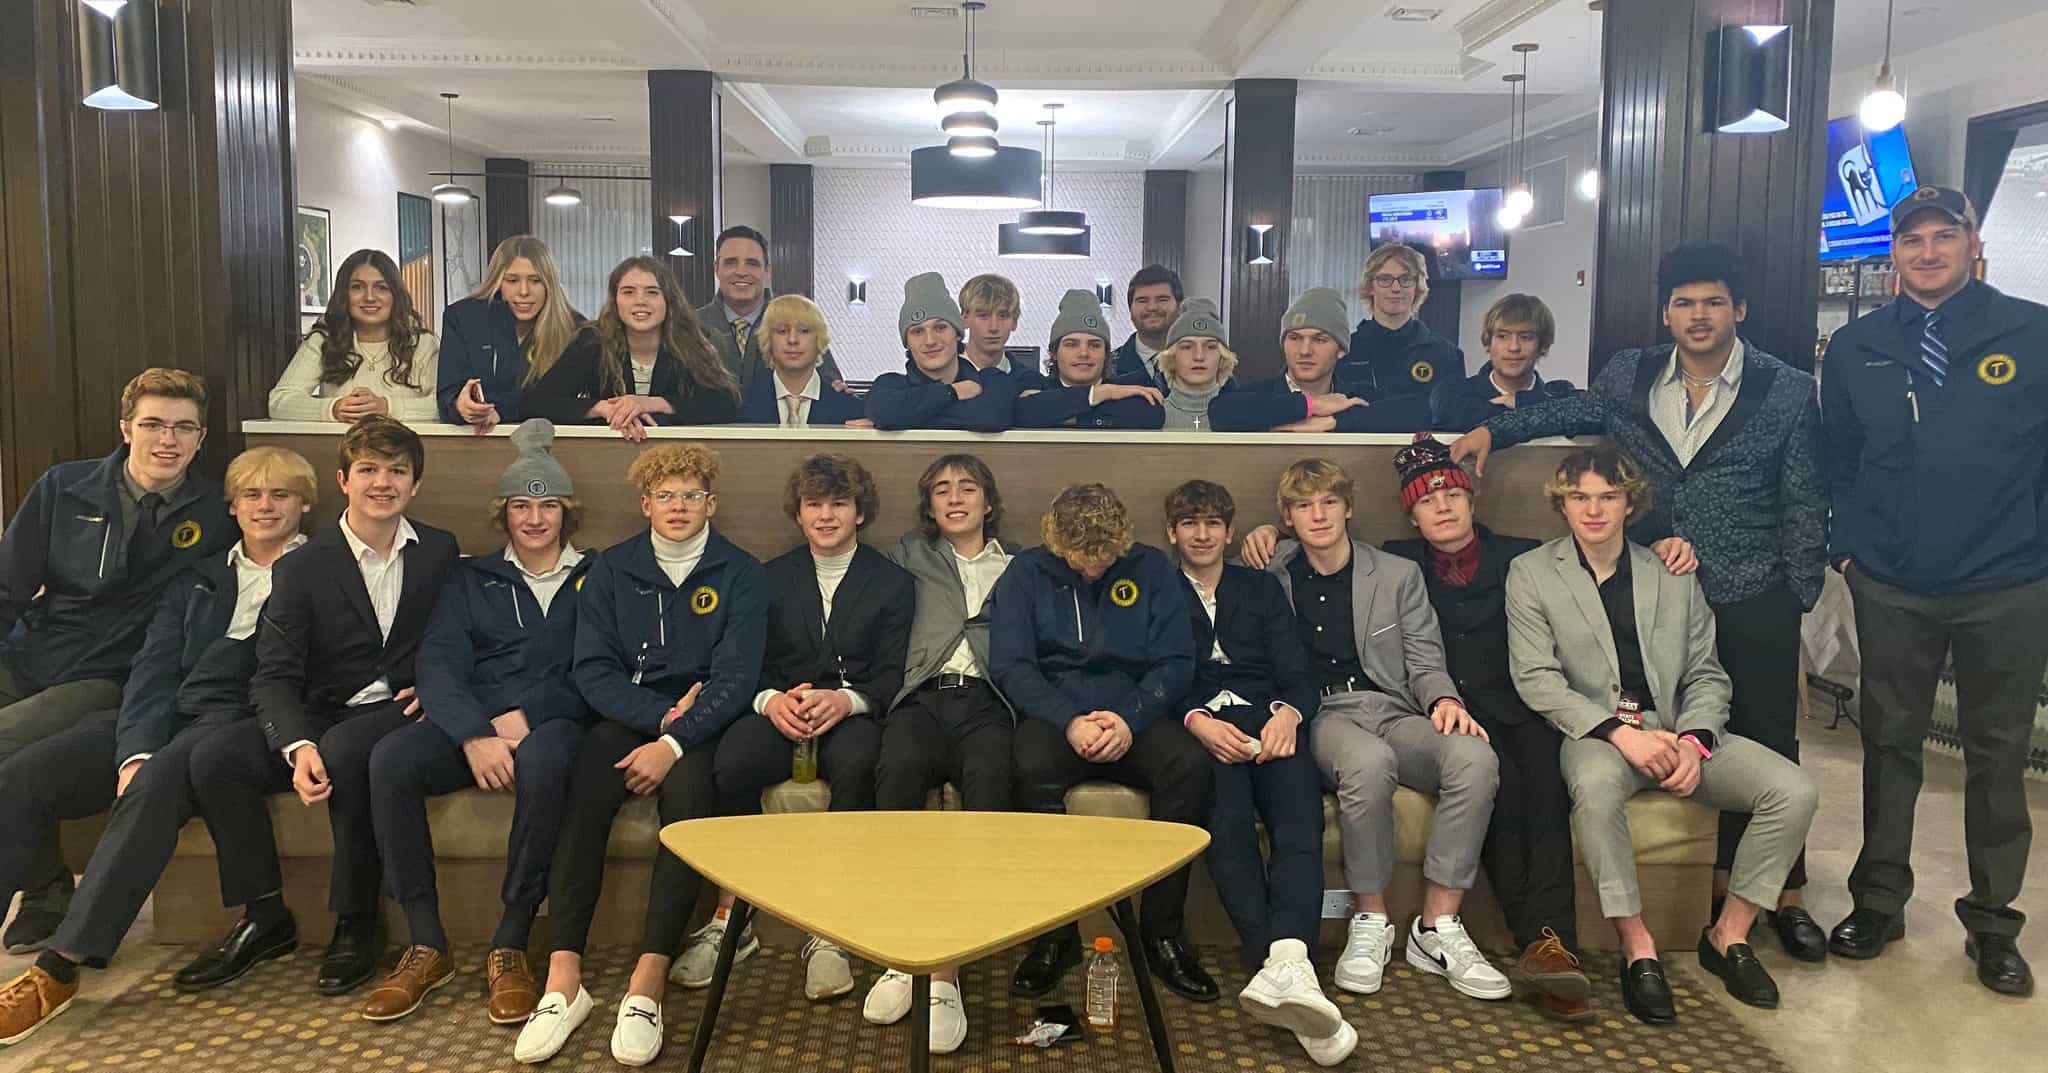 Hatchet pucksters named Academic State Champions by Wisconsin Hockey Coaches Association